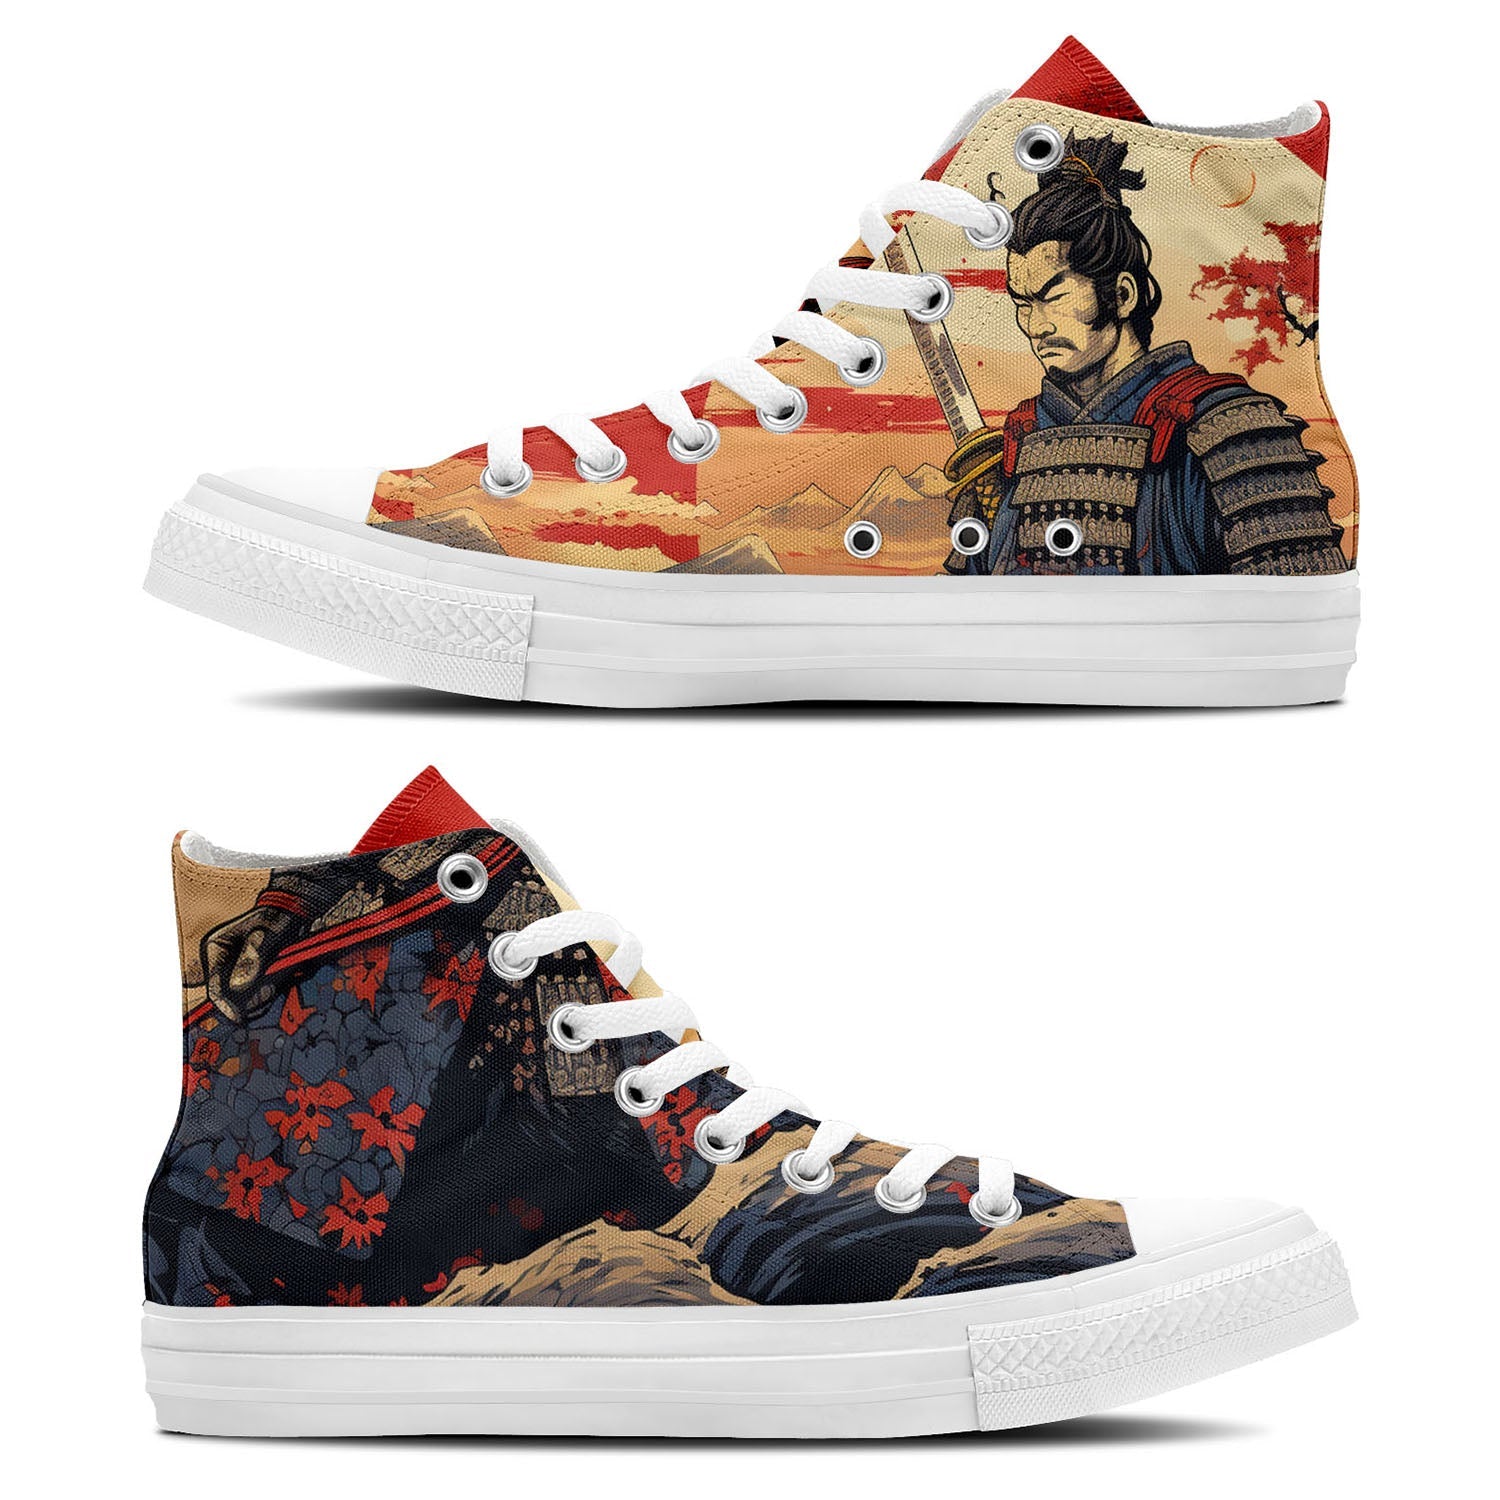 Bushido Elegance: Men and Women's Mid-Top Canvas Shoes - Embrace the Way of the Warrior in Every Stride